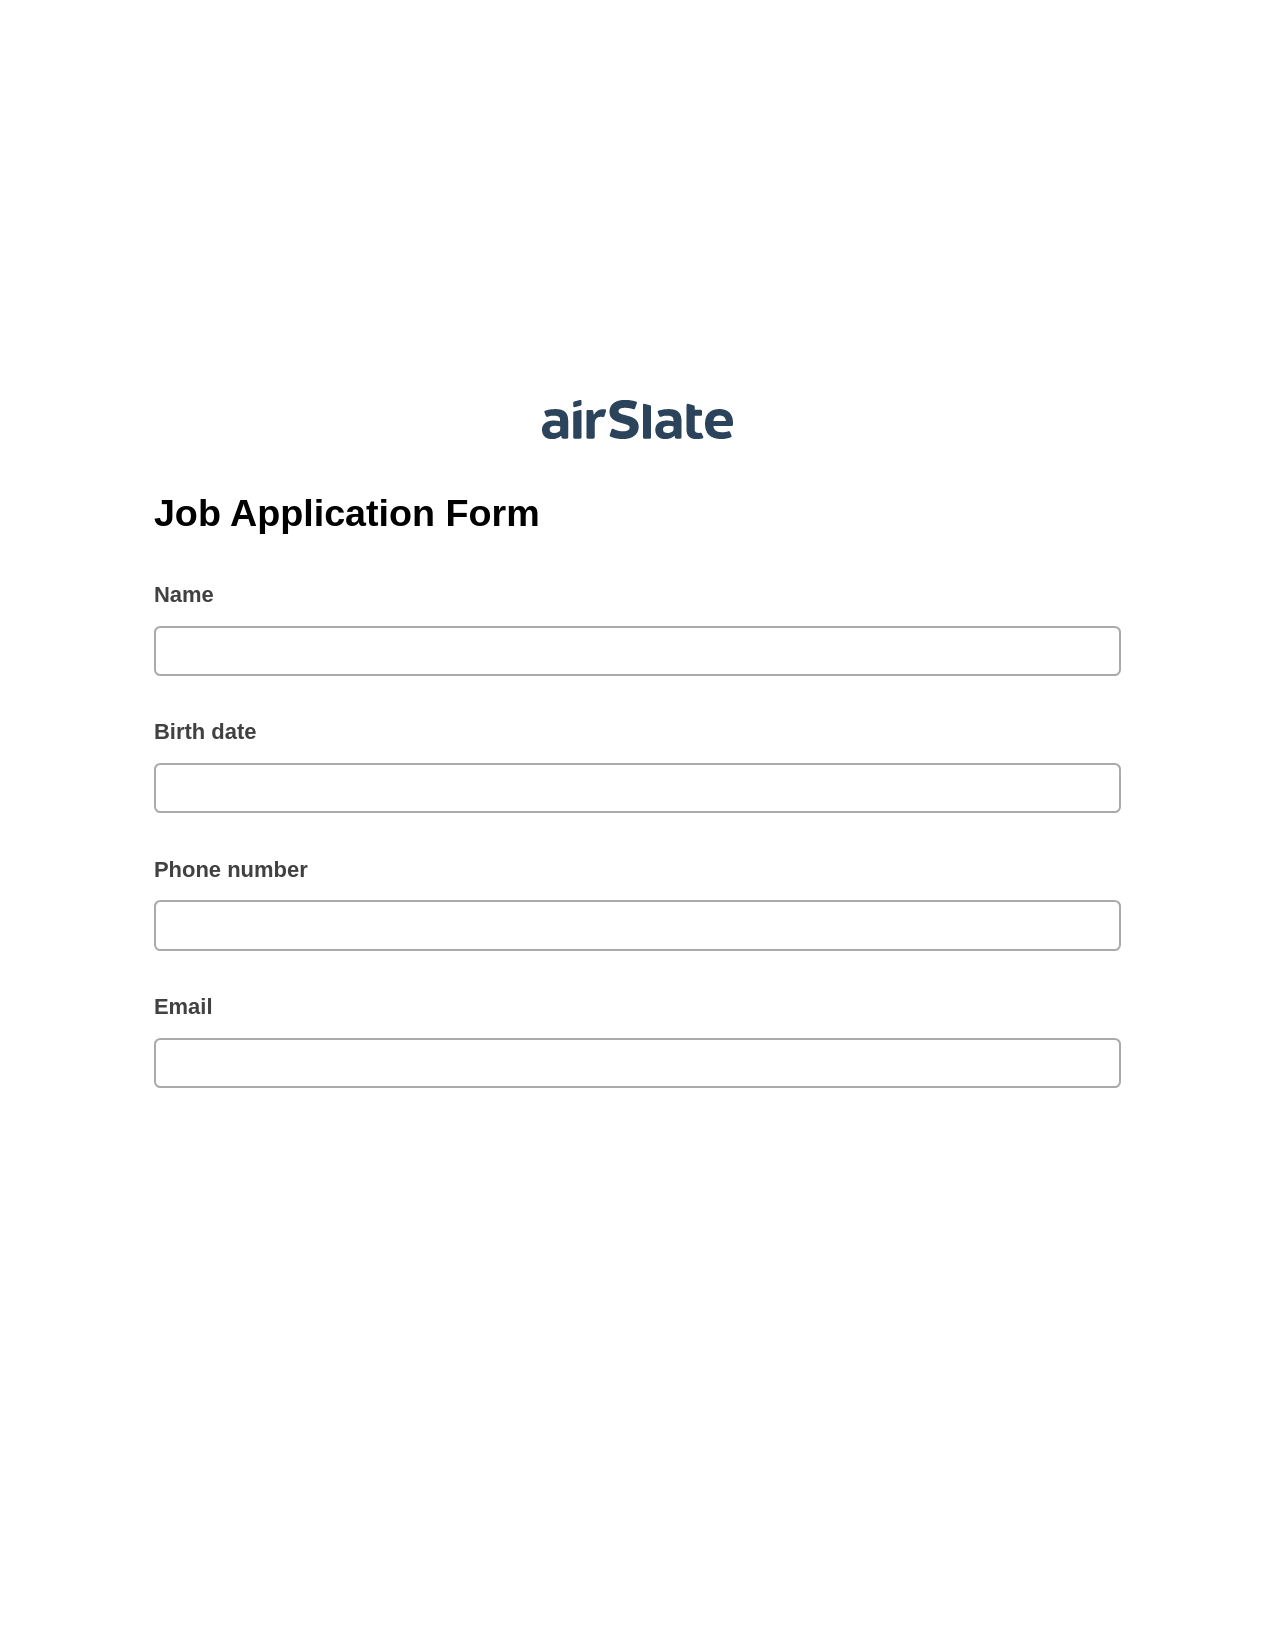 Multirole Job Application Form Pre-fill Dropdowns from Smartsheet Bot, Audit Trail Bot, Export to NetSuite Record Bot